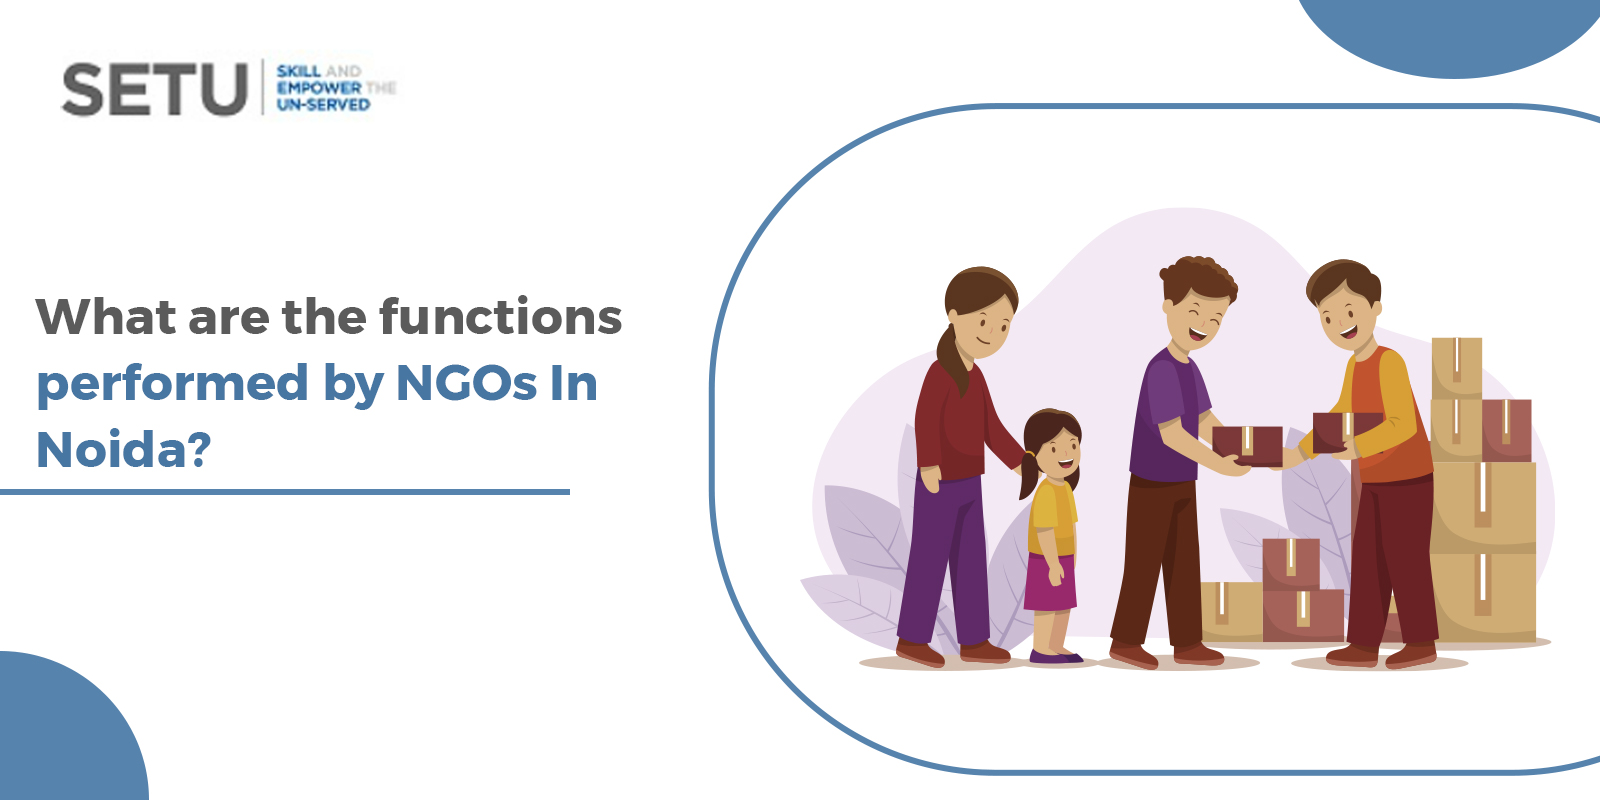 are the functions performed by NGOs In Noida